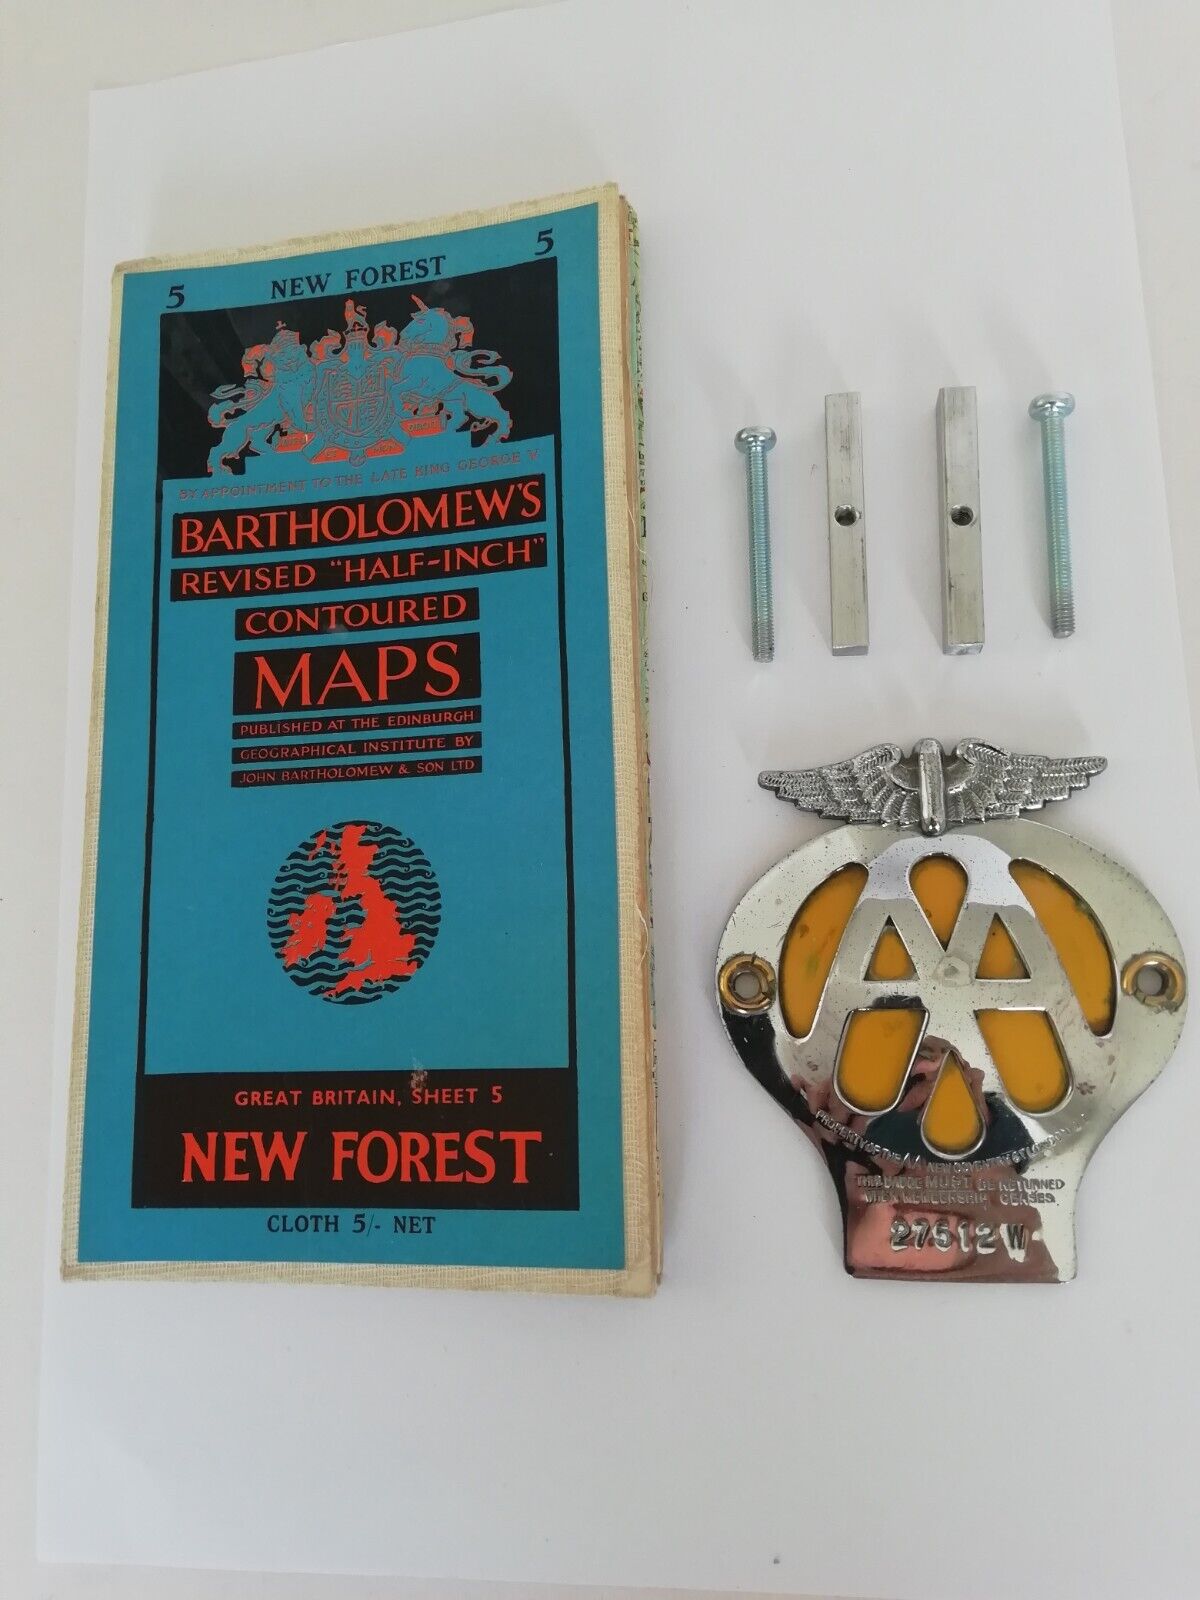 AA MOTORCYCLE SMALL BADGE no 27512W 1956-67,NEW FIXINGS & VINTAGE CLOTH MAP.